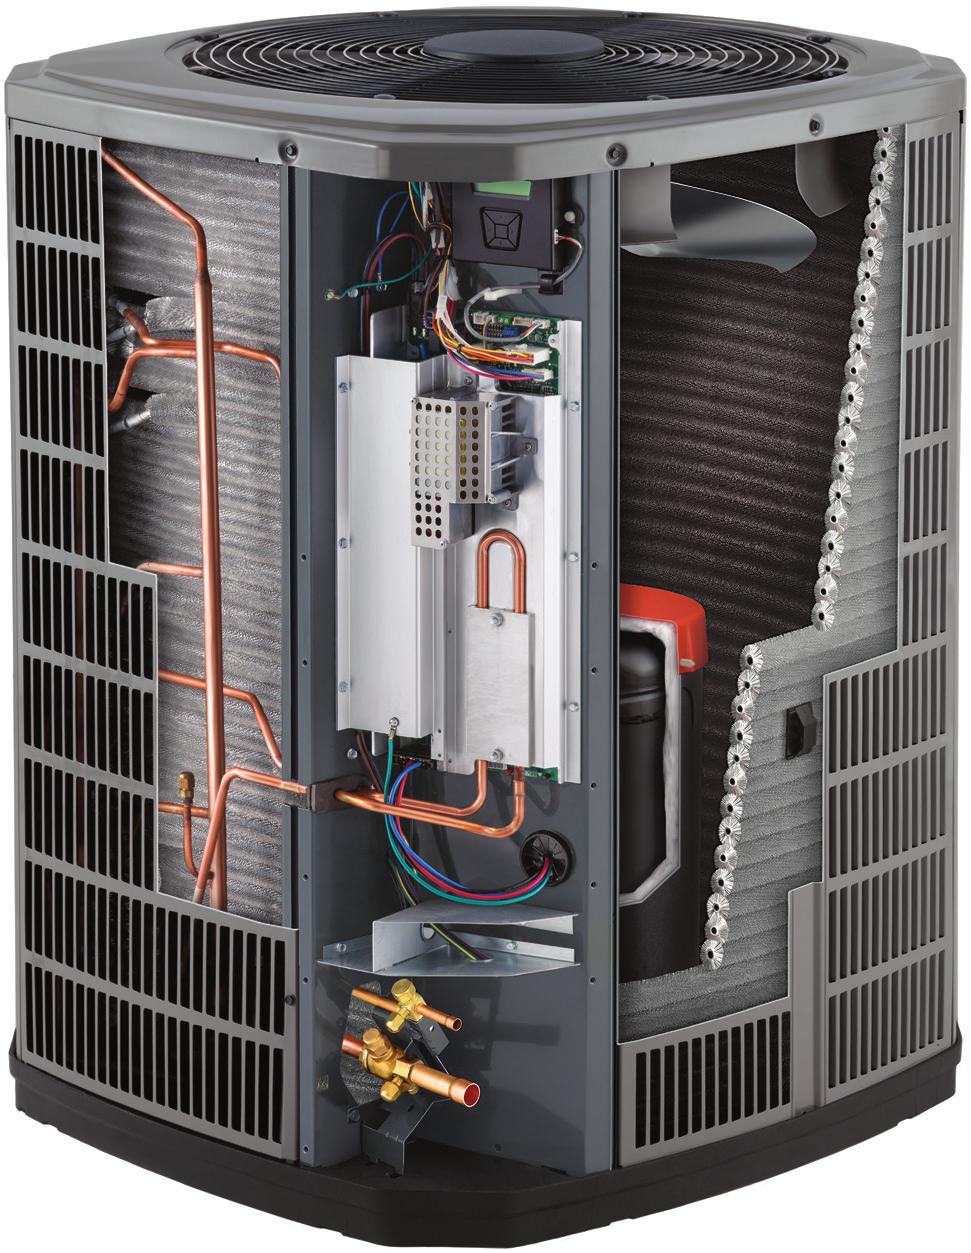 RELIABILITY, THROUGH AND THROUGH. American Standard air conditioners aren t just built to be comfortable and efficient, they re also built to last.